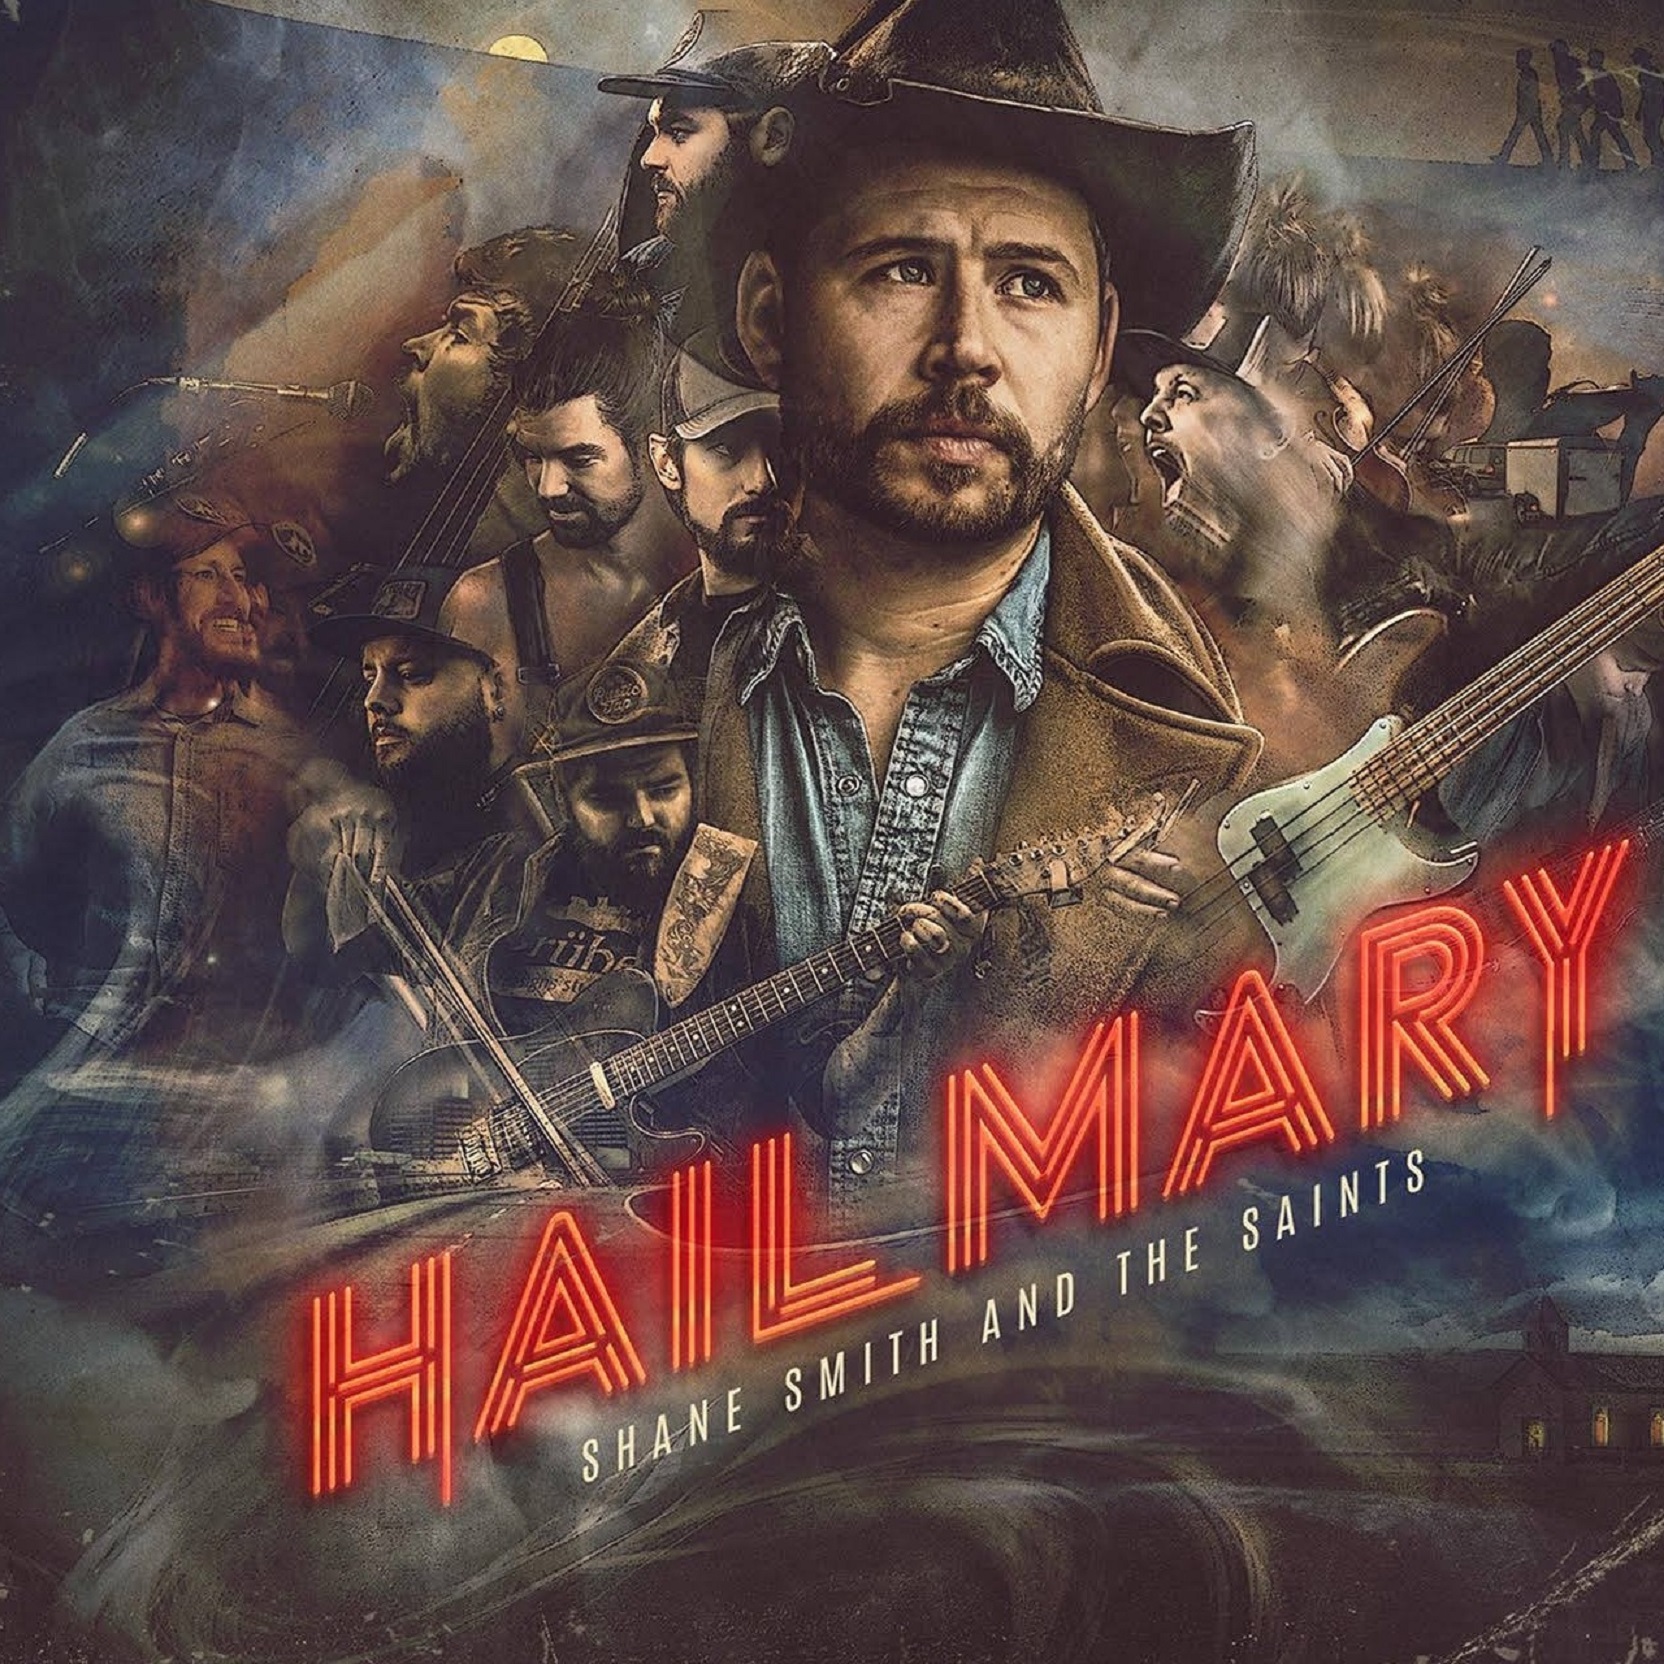 Shane Smith & The Saints New Album, Hail Mary, Out Now